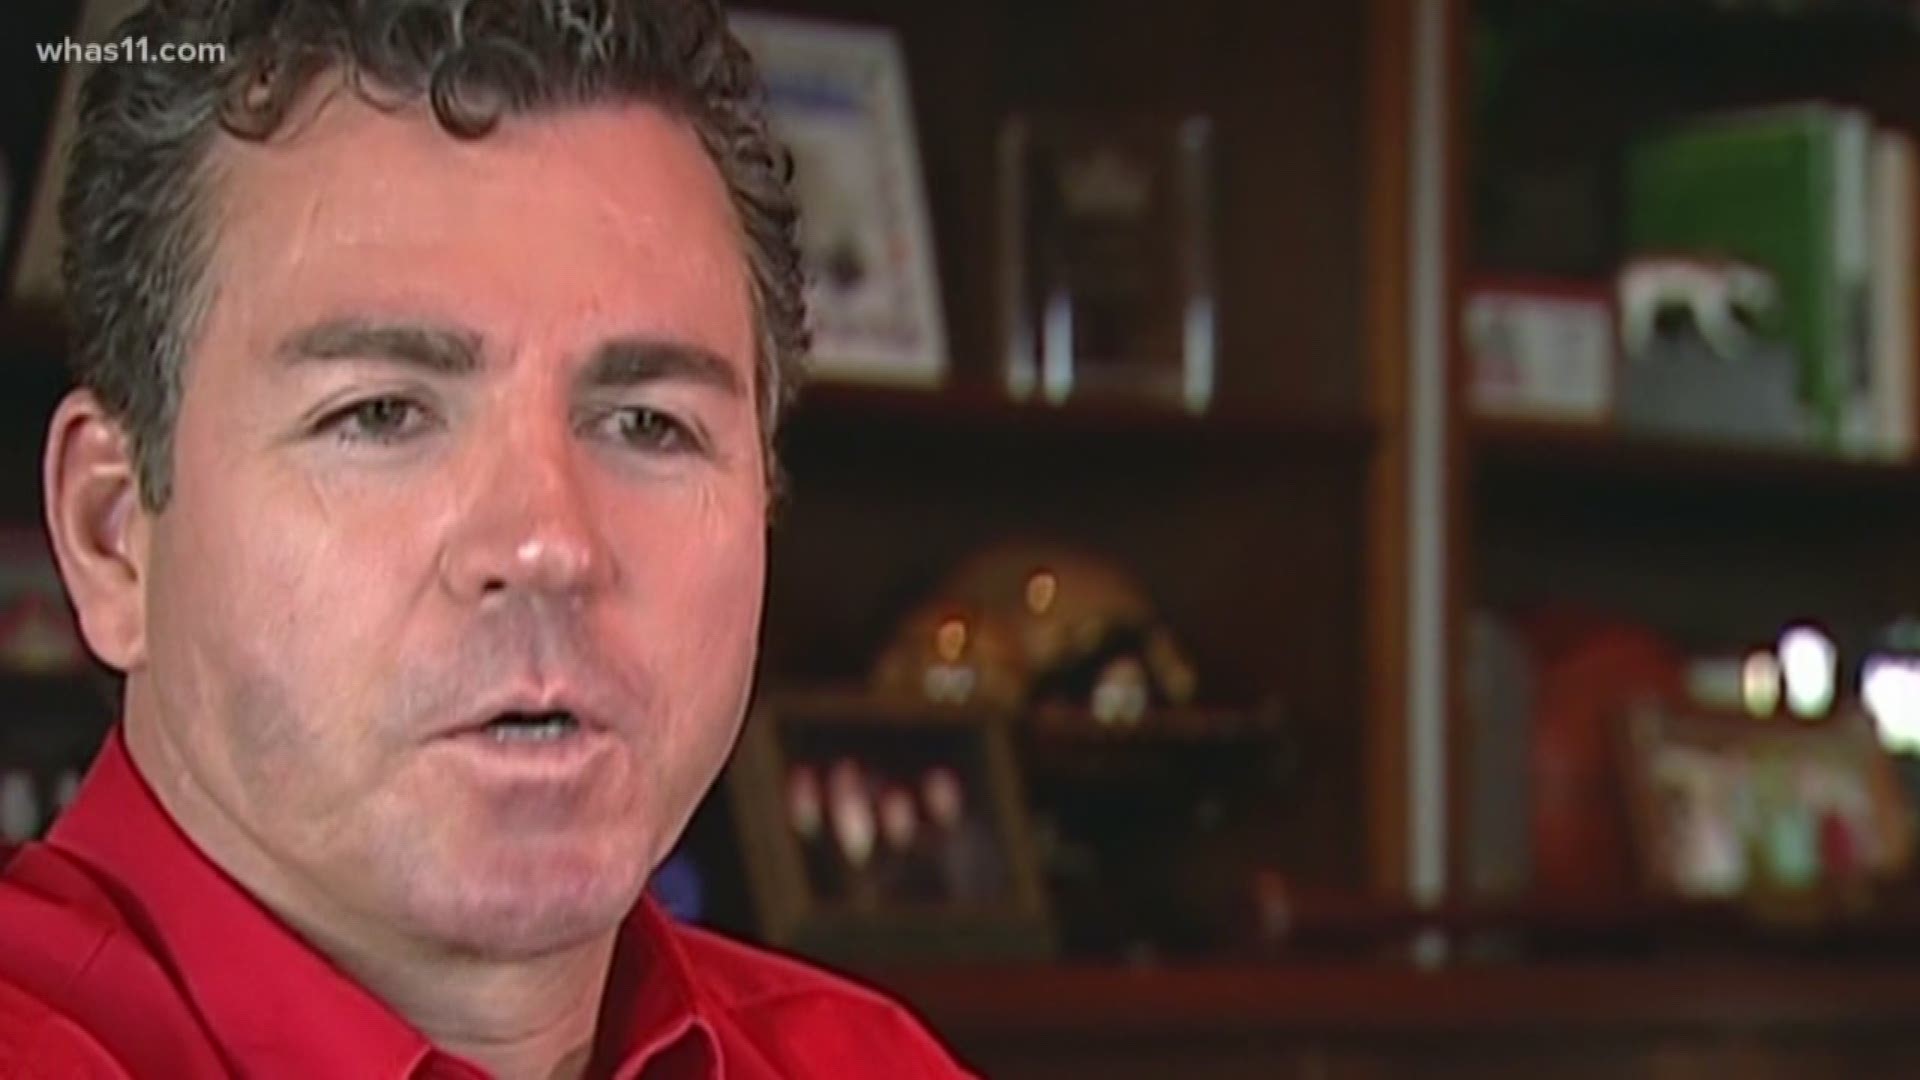 Papa John's announced on July 13 John Schnatter's image will no longer be a part of the marketing for the pizza giant after he admitted to using the N-word.